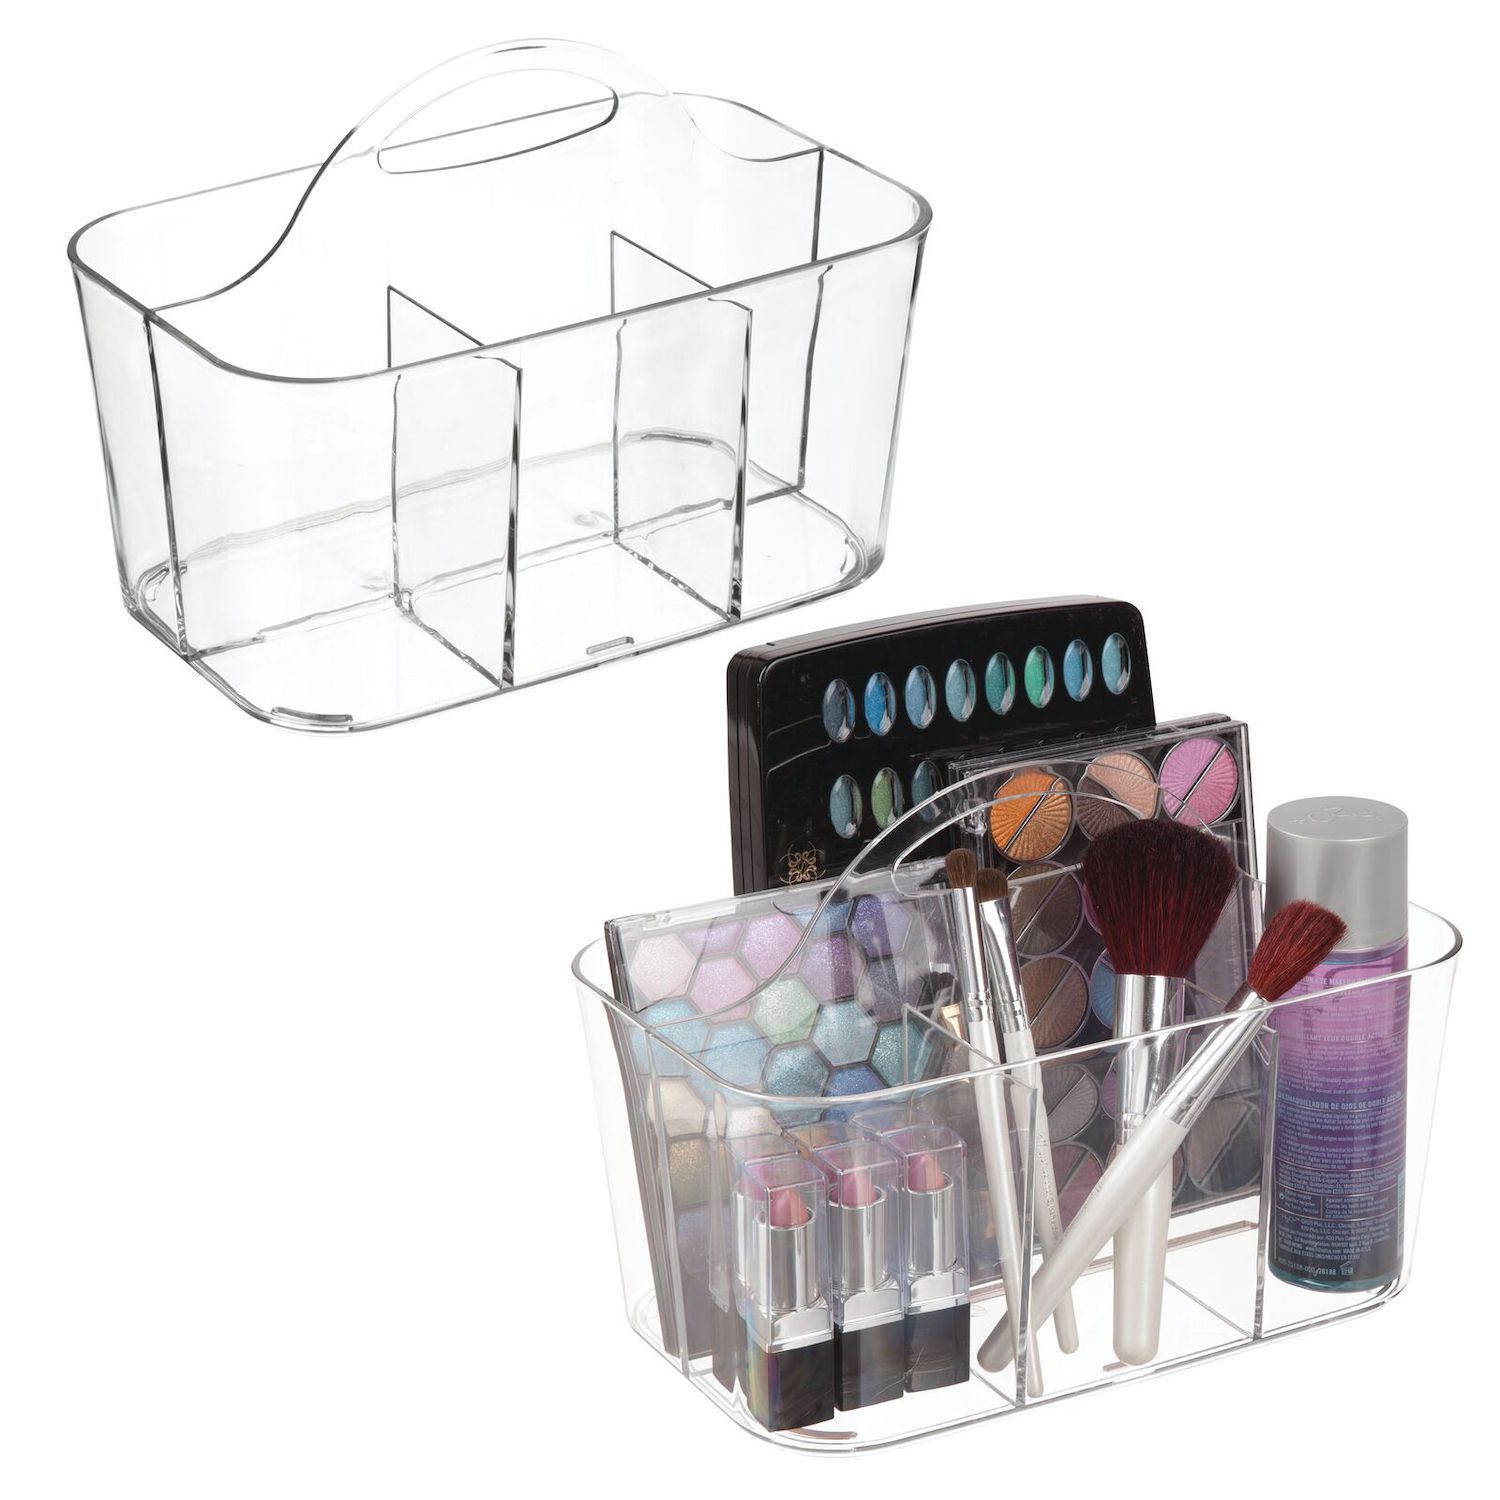 Glamlily Acrylic Makeup Brush Holder with Lid and Beads Cosmetic Storage Organizer (6 x 5.7 x 9.25 in)